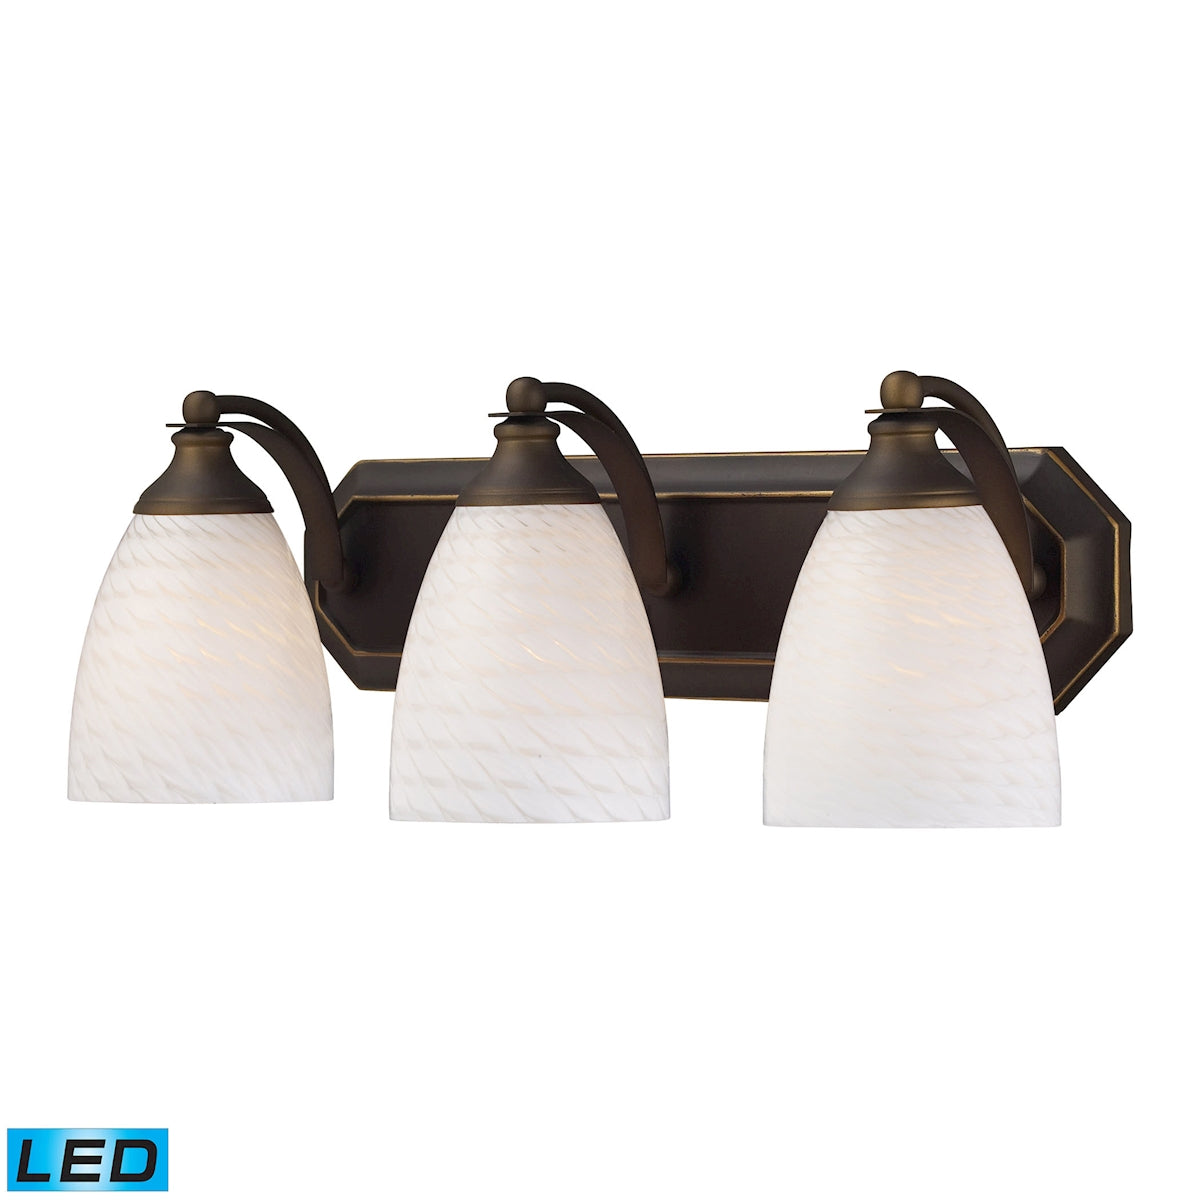 ELK Lighting 570-3B-WS-LED Mix-N-Match Vanity 3-Light Wall Lamp in Aged Bronze with White Swirl Glass - Includes LED Bulbs